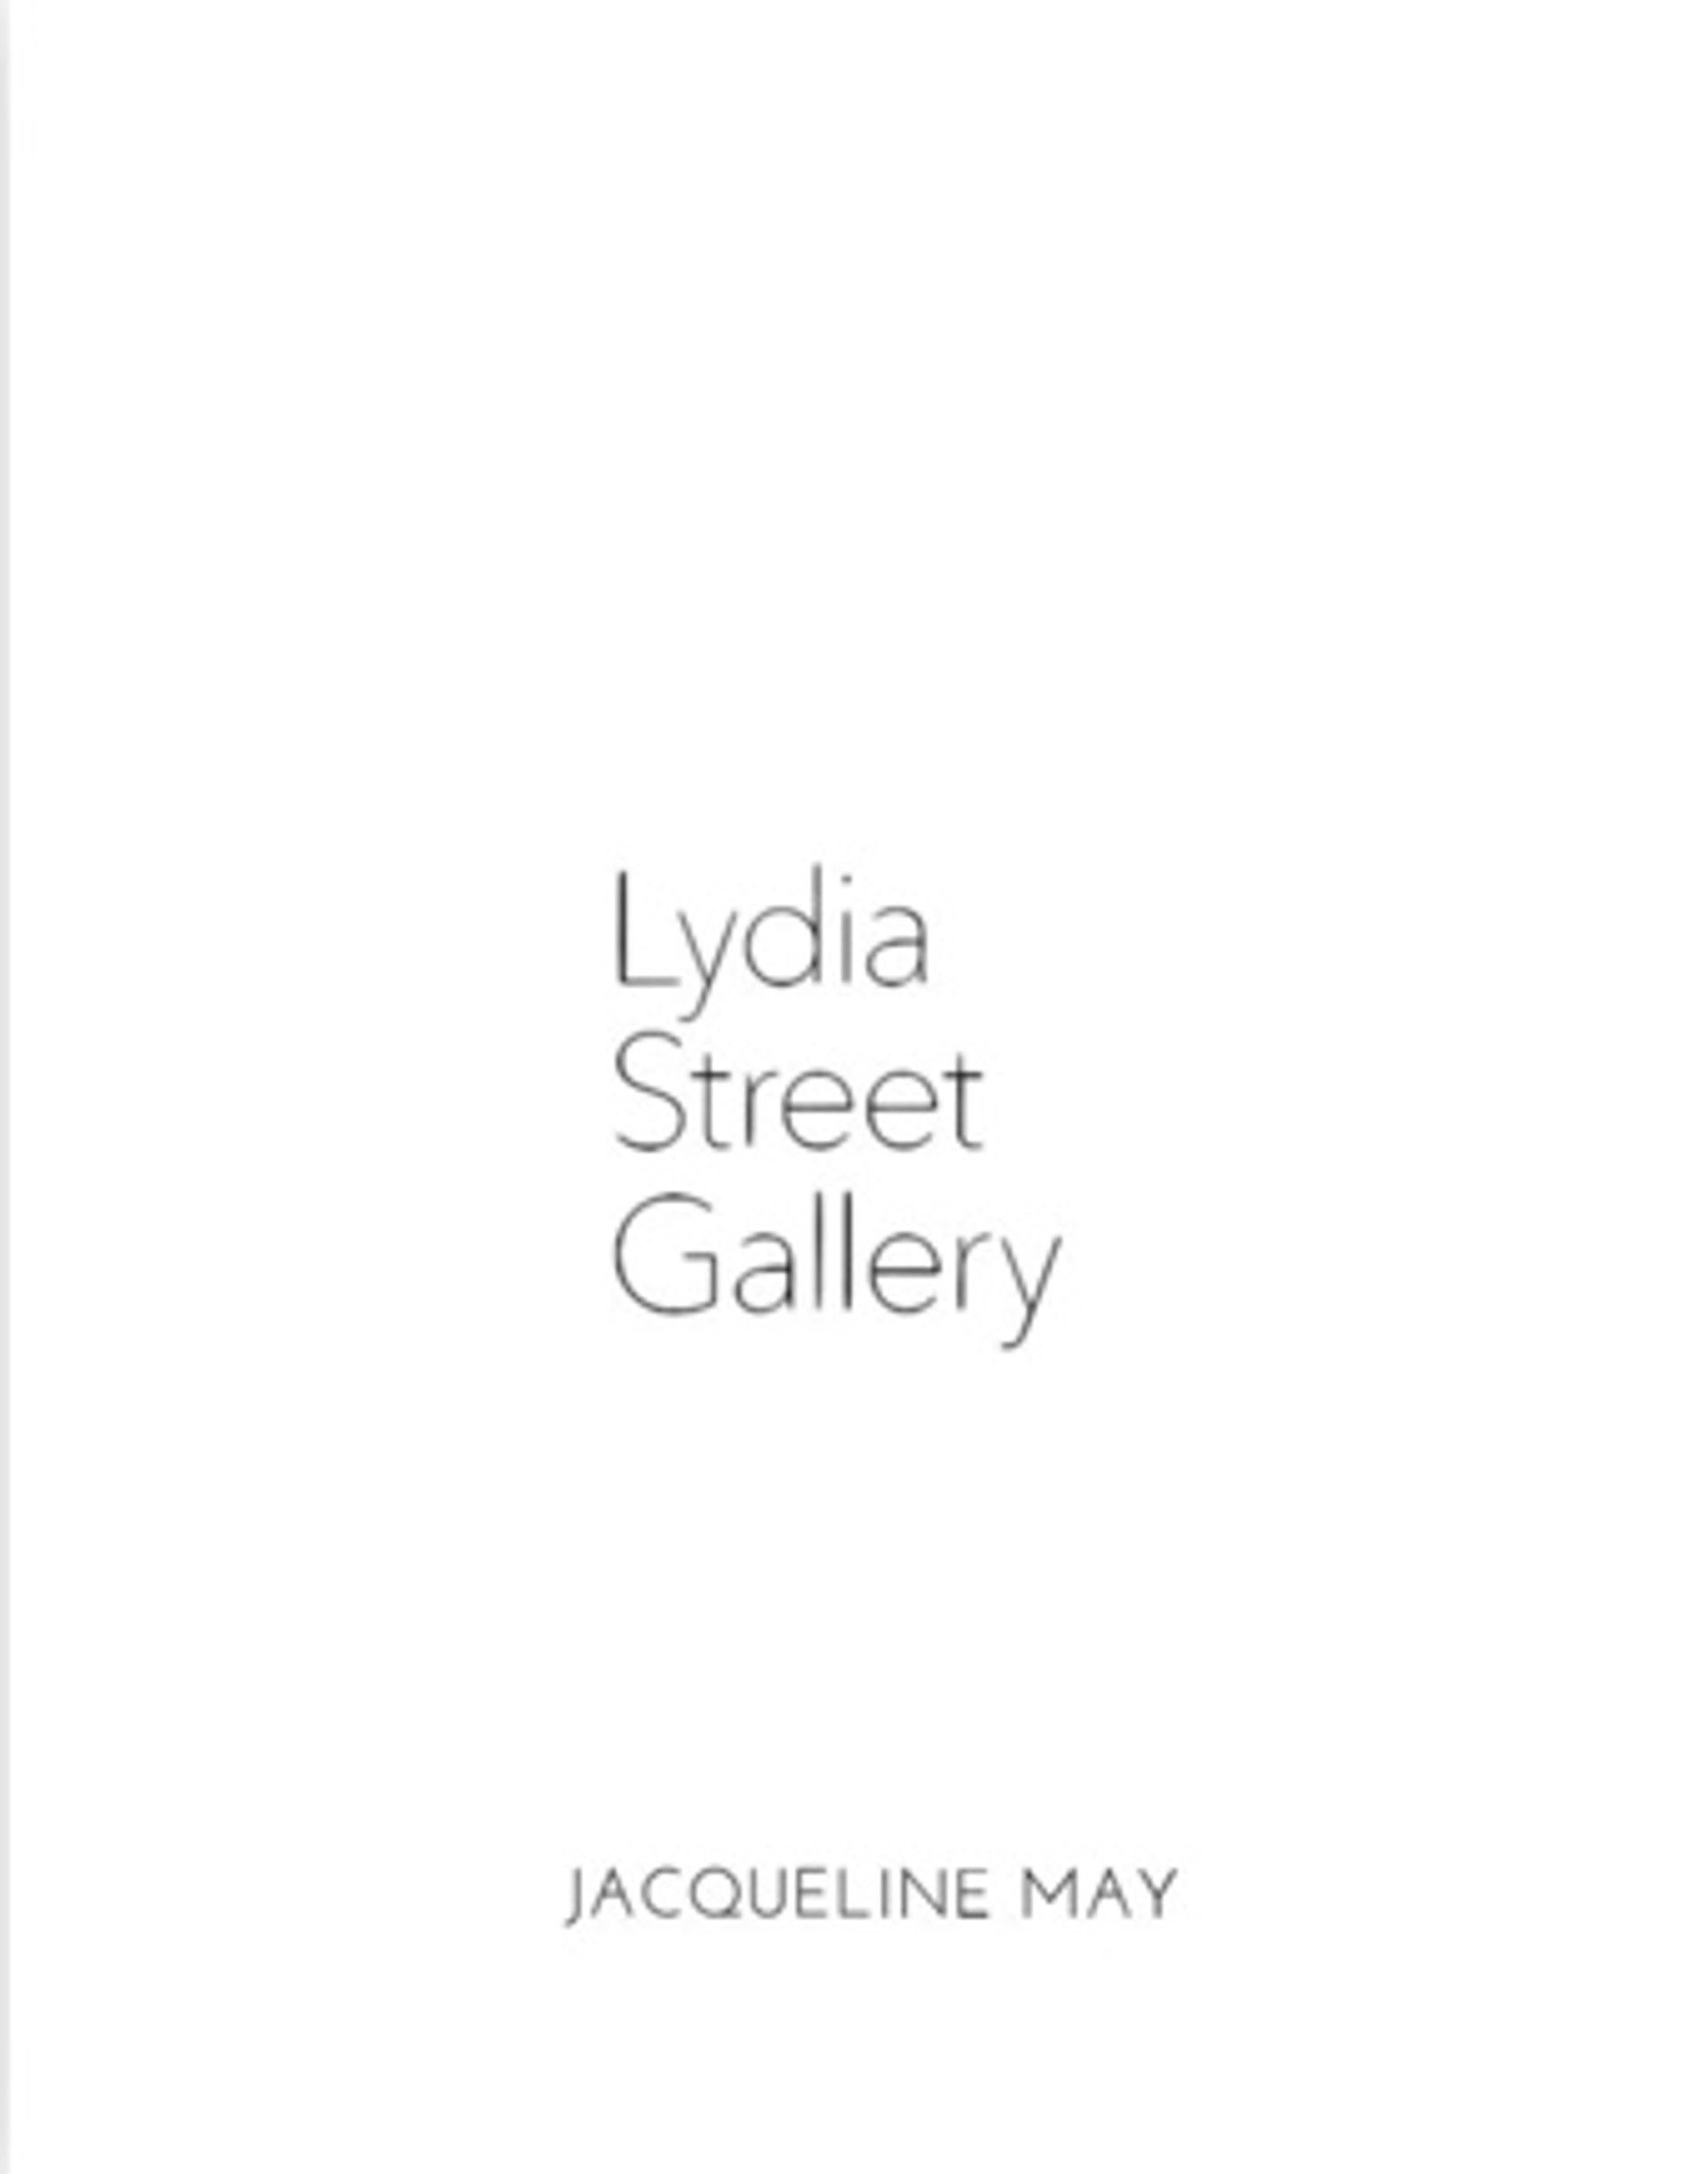 Artist Catalog - Jacqueline May by Lydia Street Gallery